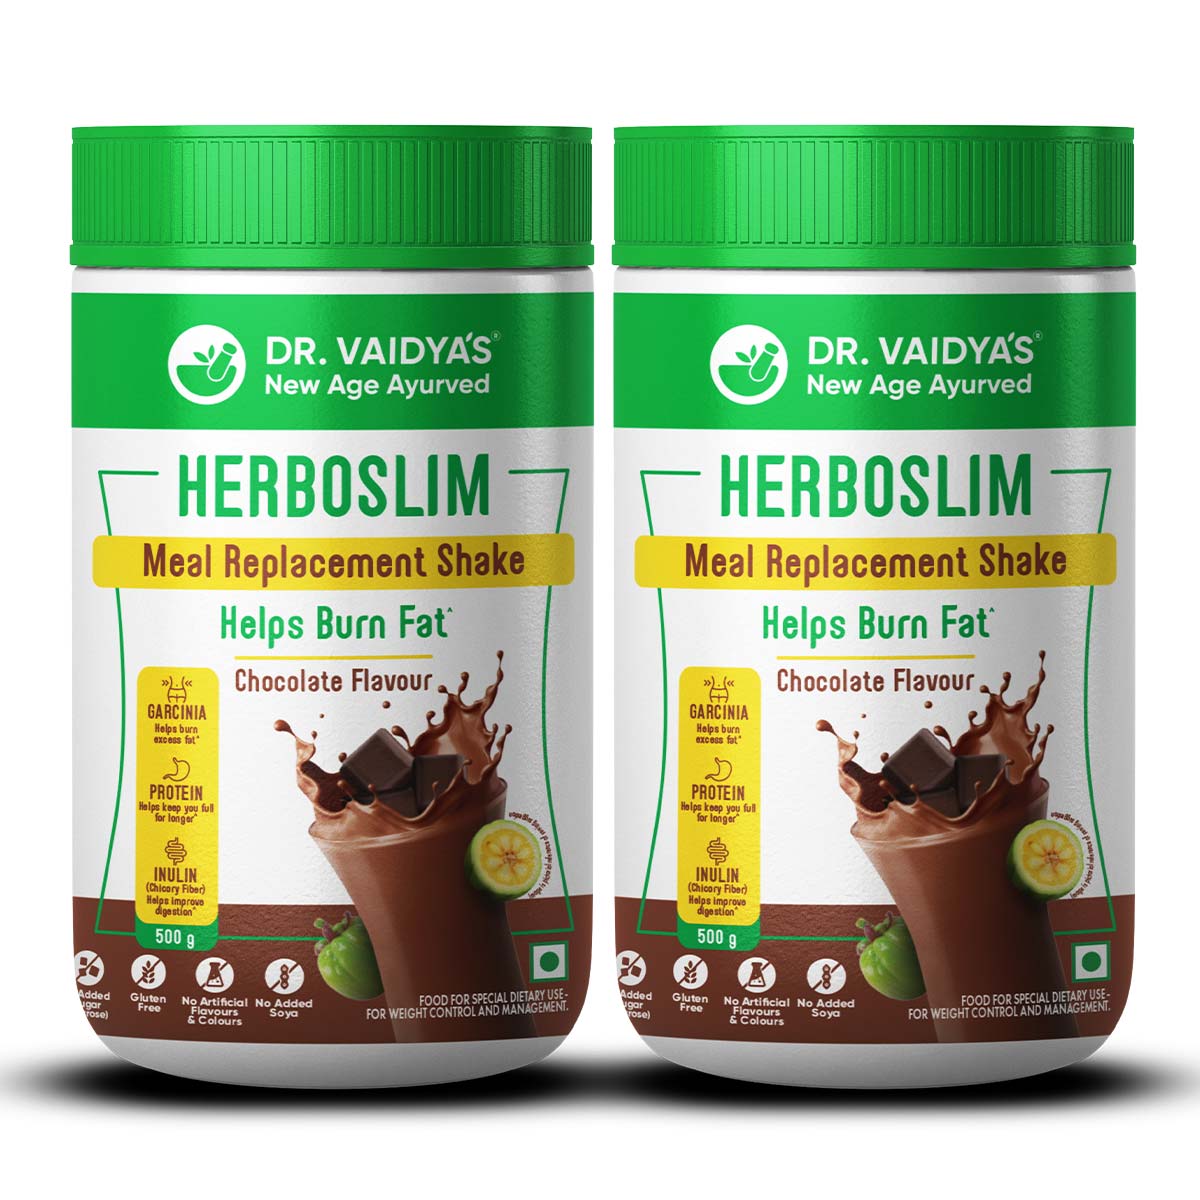 Herboslim Shake: Nutrition-Dense, Low Calorie Meal Replacement for Weight Management